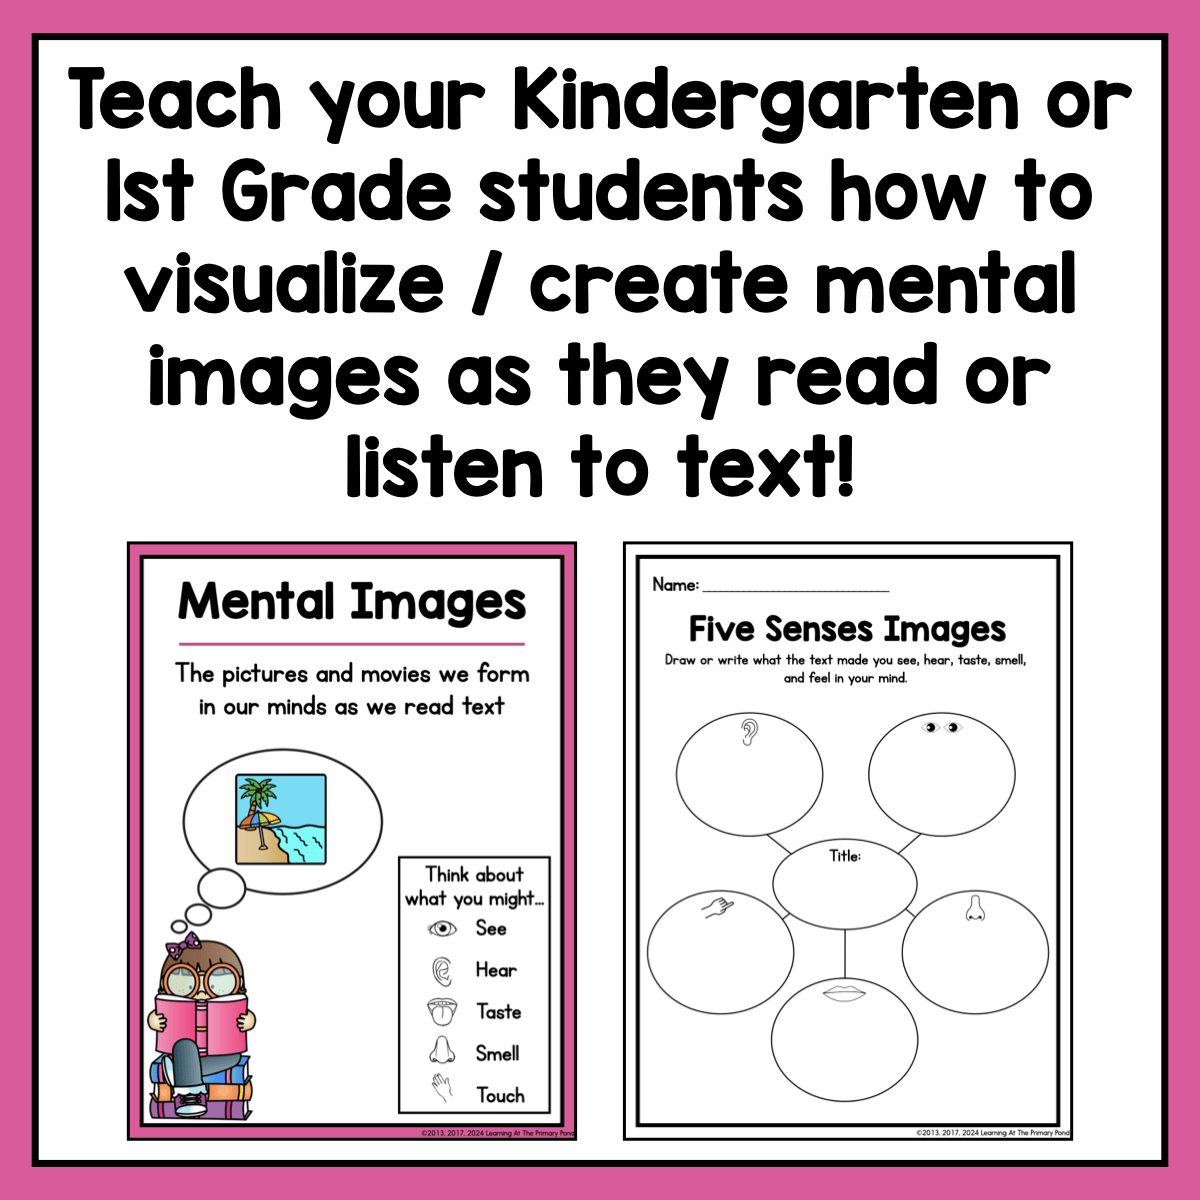 Reading Comprehension Lesson Plans for K-1 {Unit 7: Visualizing / Mental Images} - learning-at-the-primary-pond